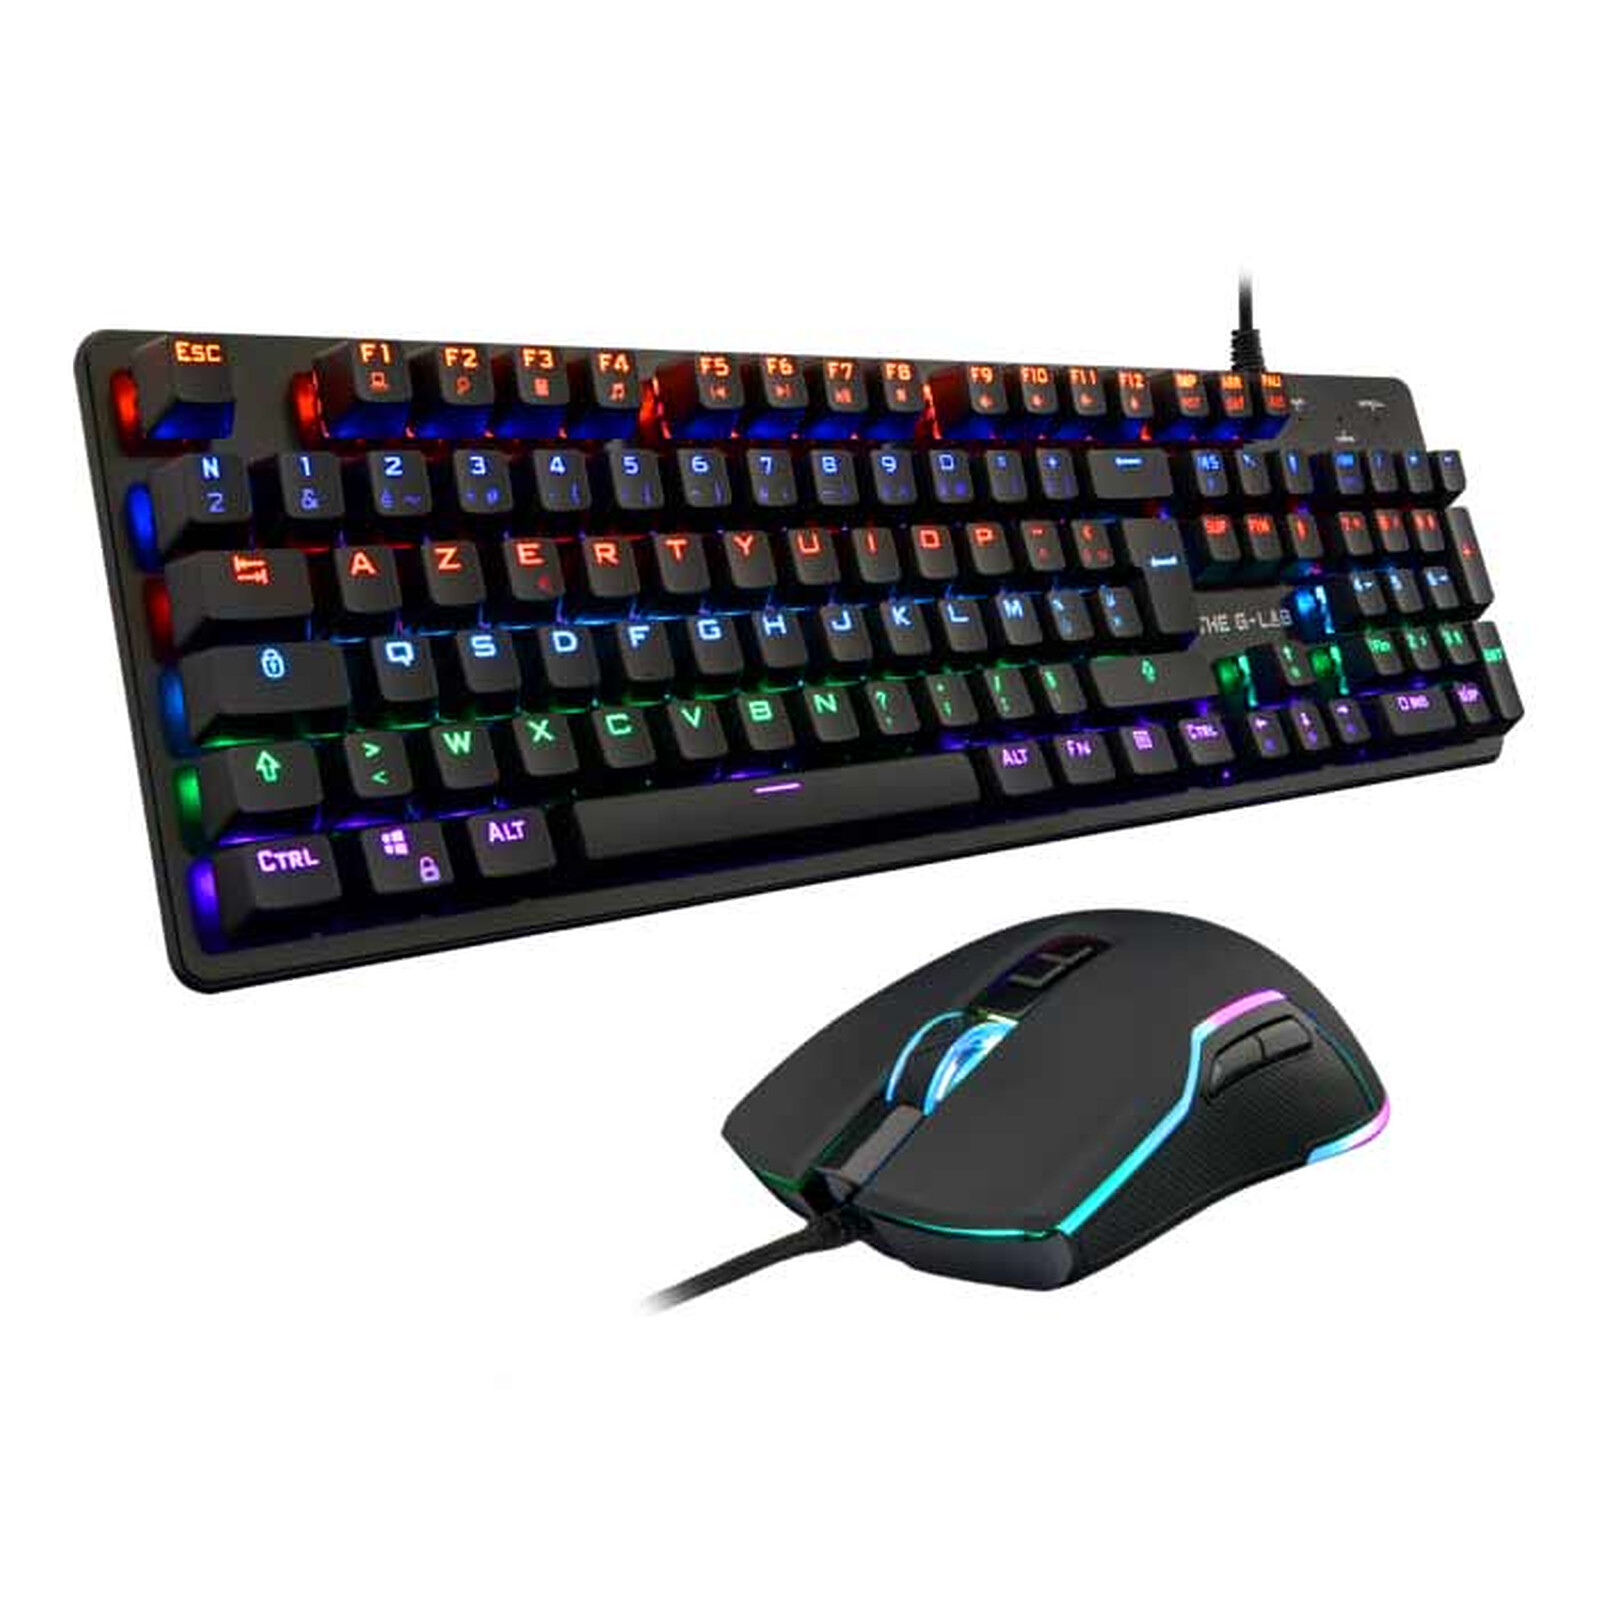 The G-LAB Combo KRYPTON - Clavier Gaming AZERTY USB Anti-Ghosting + Souris  Gaming 6 boutons 3200 dpi - Pack Gamer filaire PC PS4 Xbox One Mac  Rétro-éclairage RGB (Noir) : : Informatique